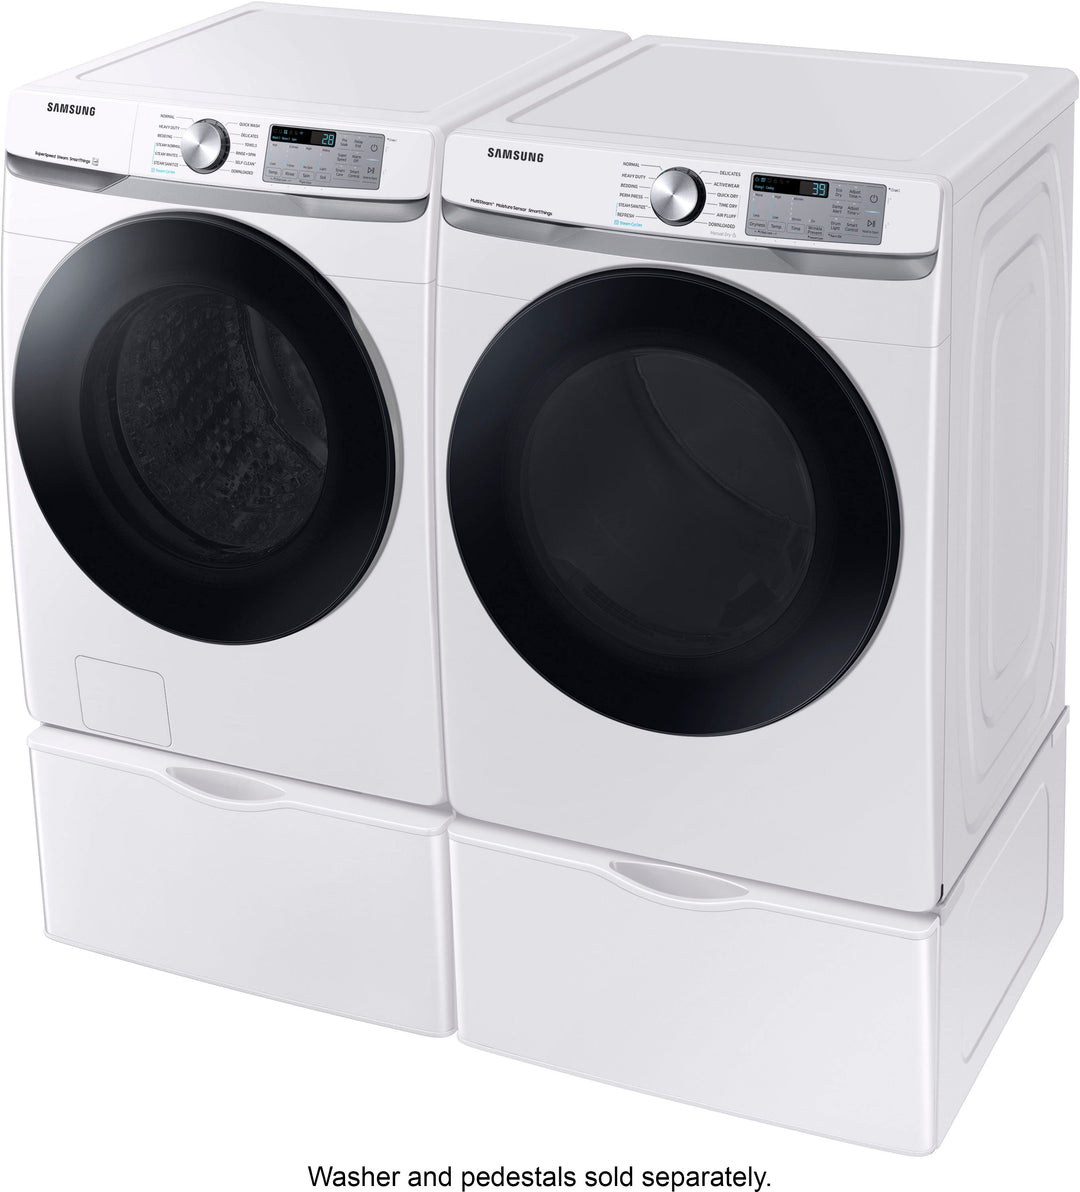 Samsung - 7.5 cu. ft. Smart Electric Dryer with Steam Sanitize+ - White_5